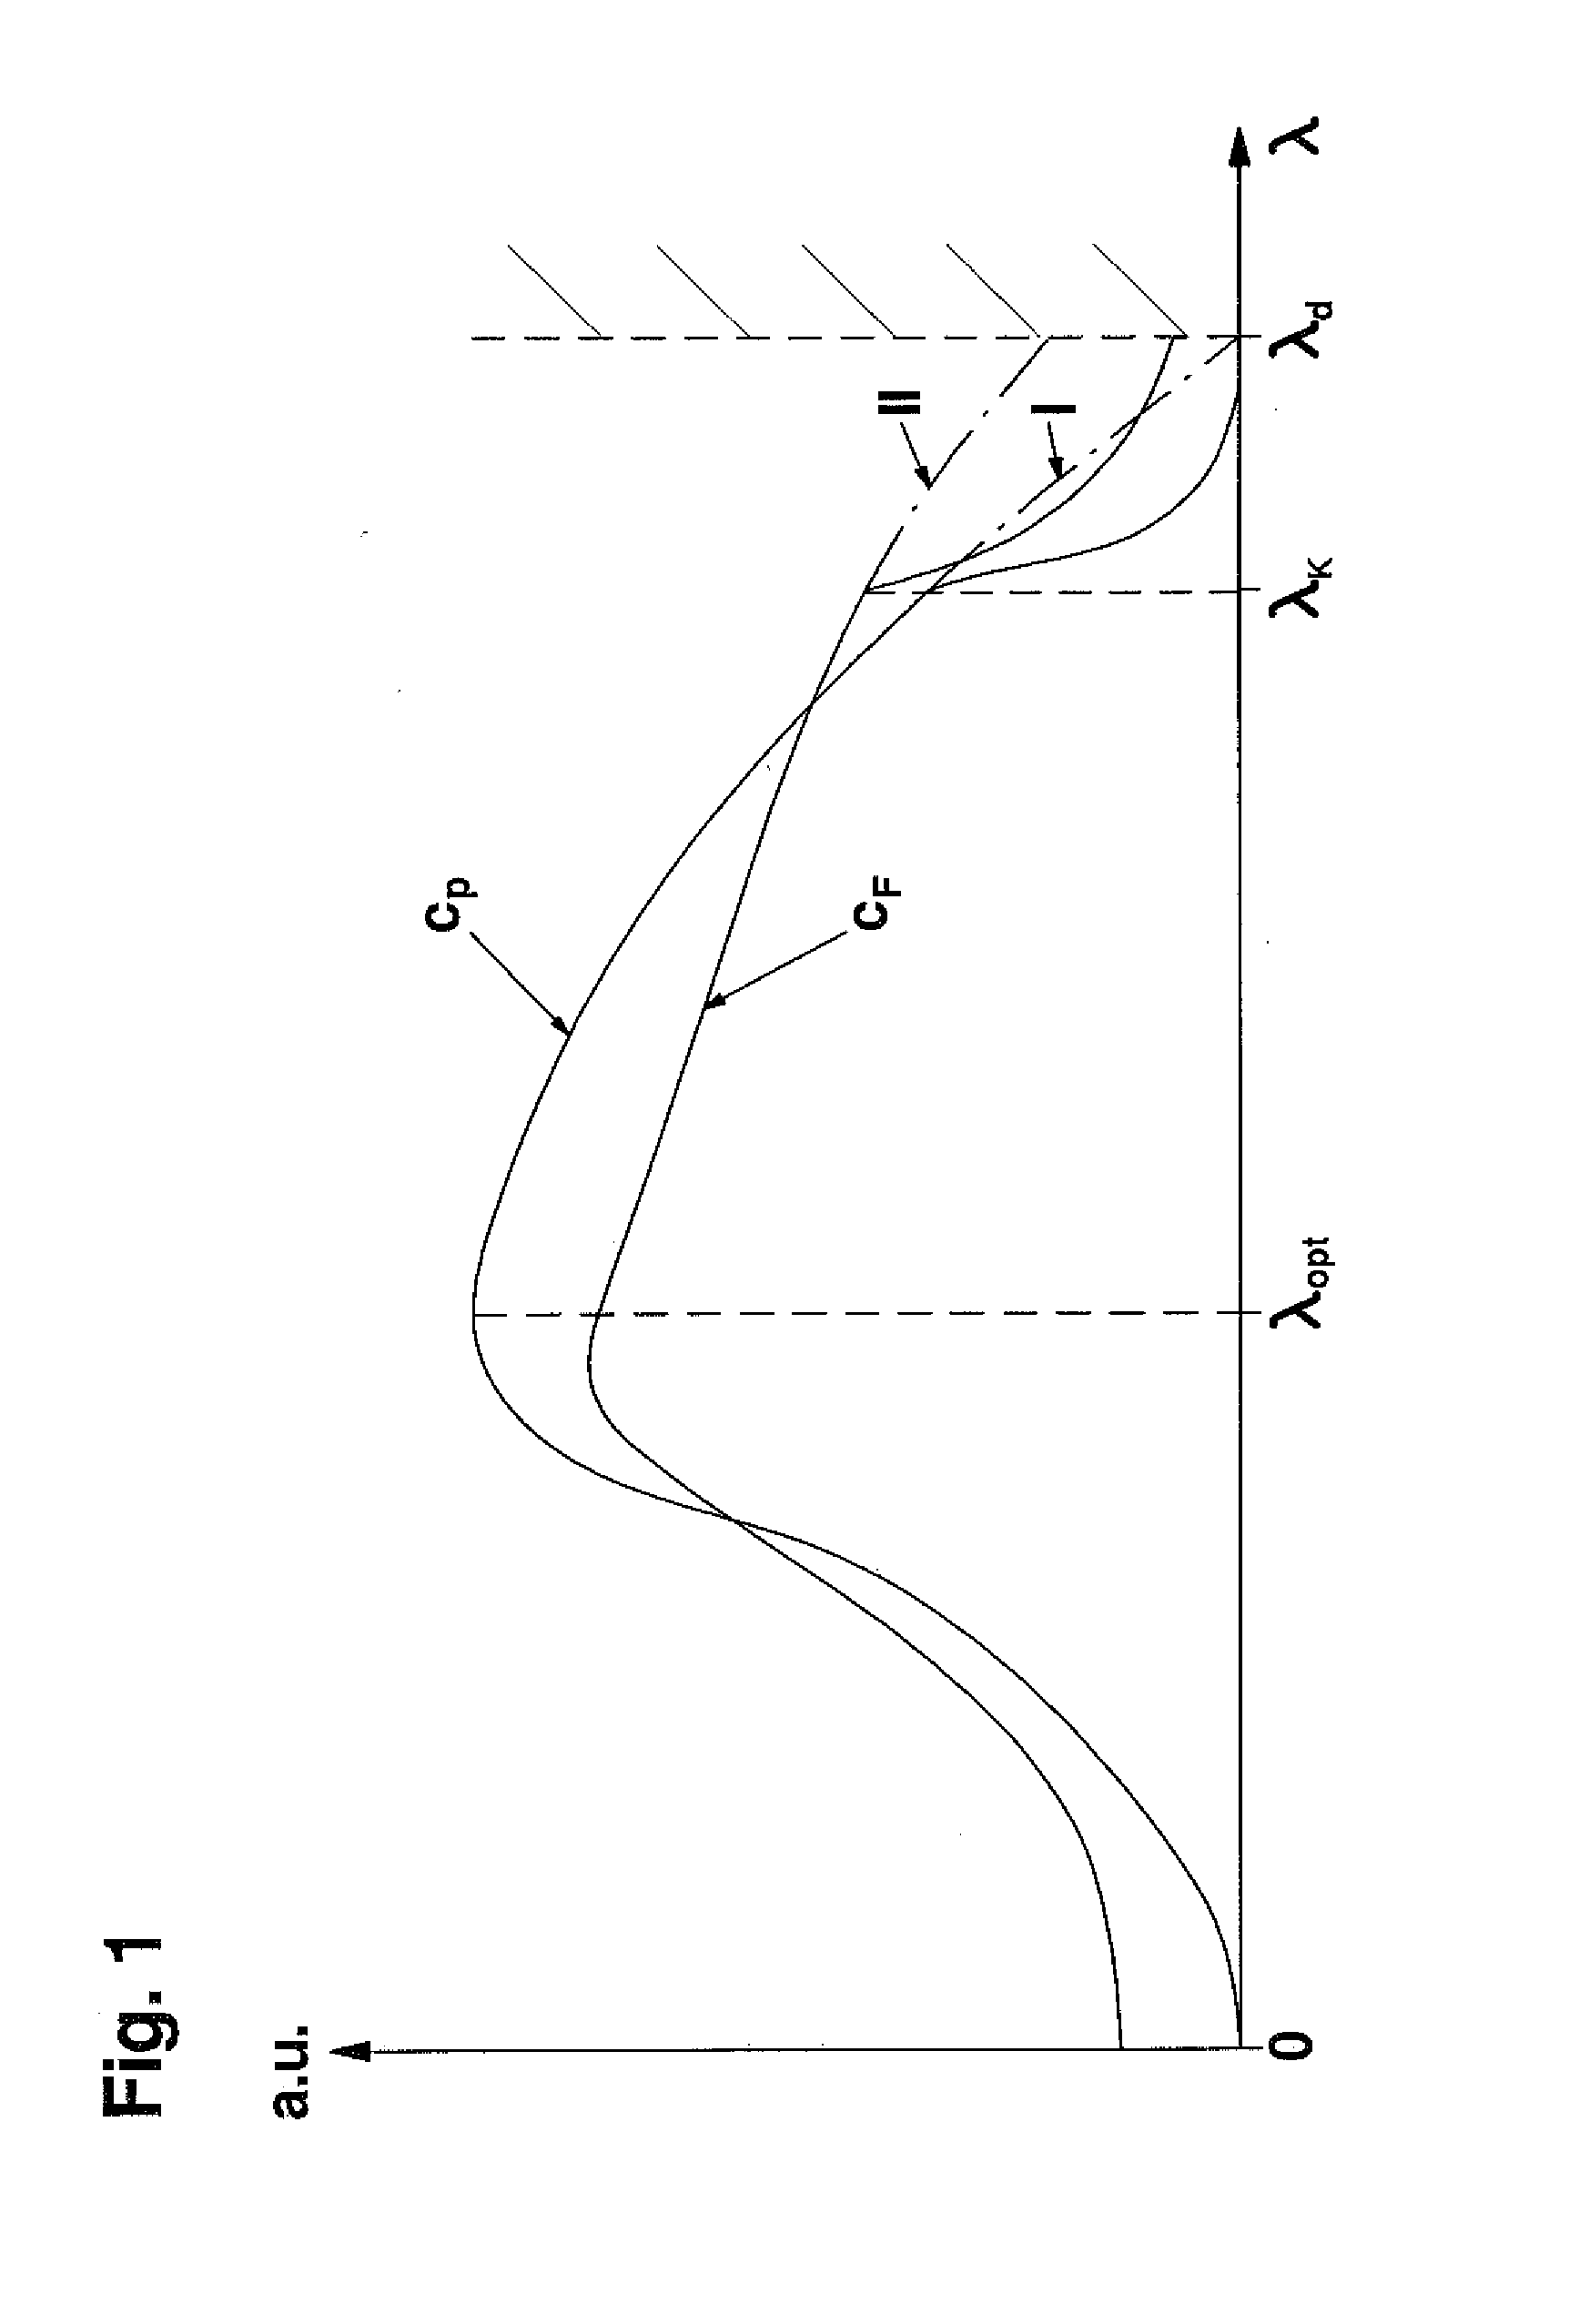 Marine current power plant and a method for its operation